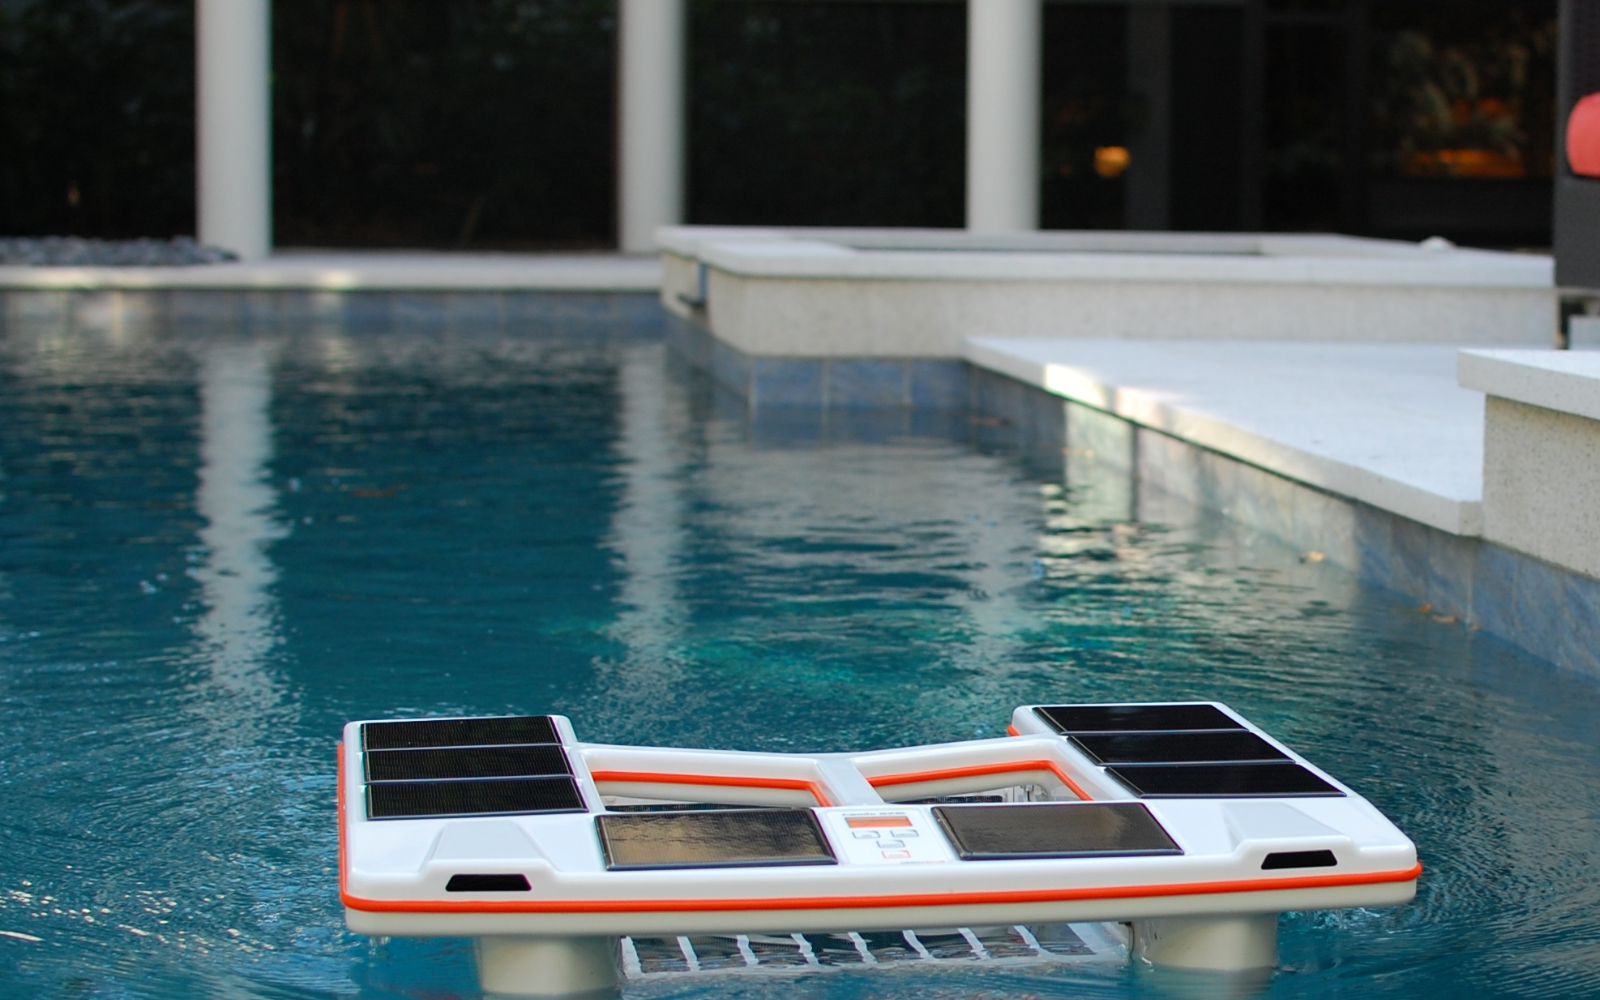 The SkimDevil Pure surface skimmer for pools